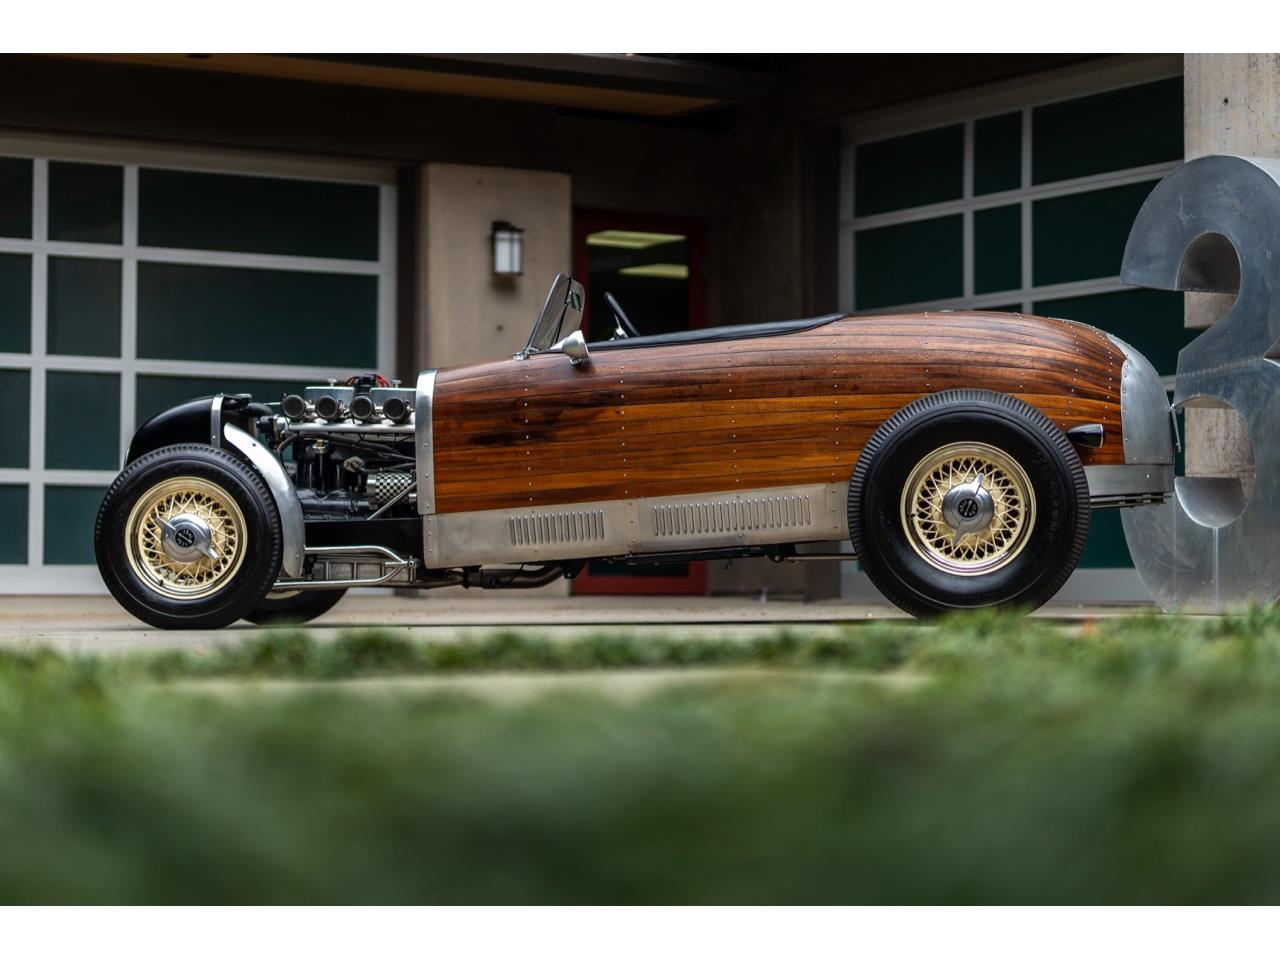 1932 Ford Roadster for sale in Monterey, CA ...